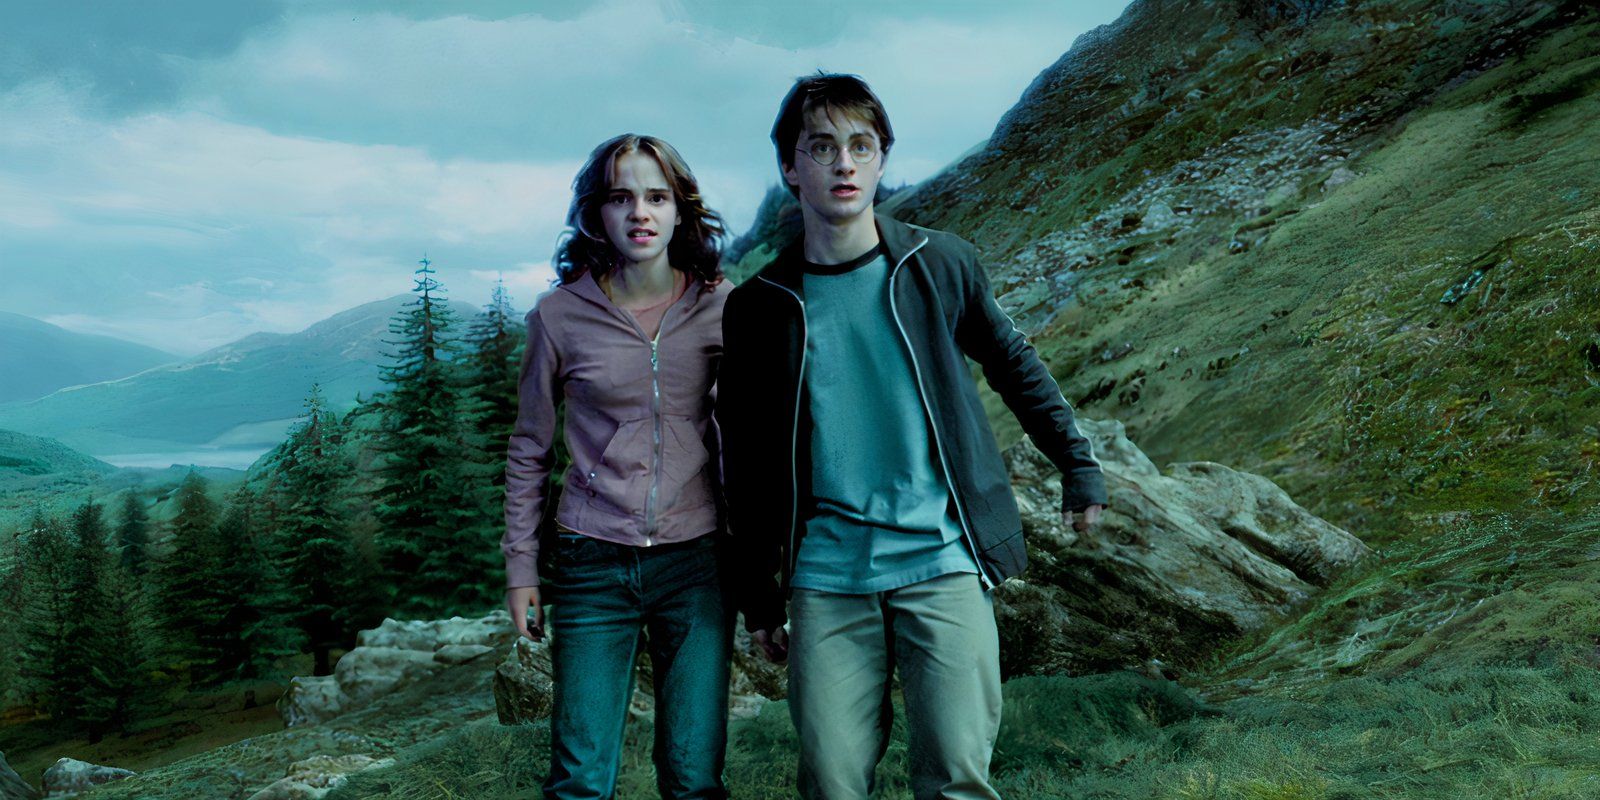 Daniel Radcliffe as Harry and Emma Watson as Hermione in Harry Potter and the Prisoner of Azkaban